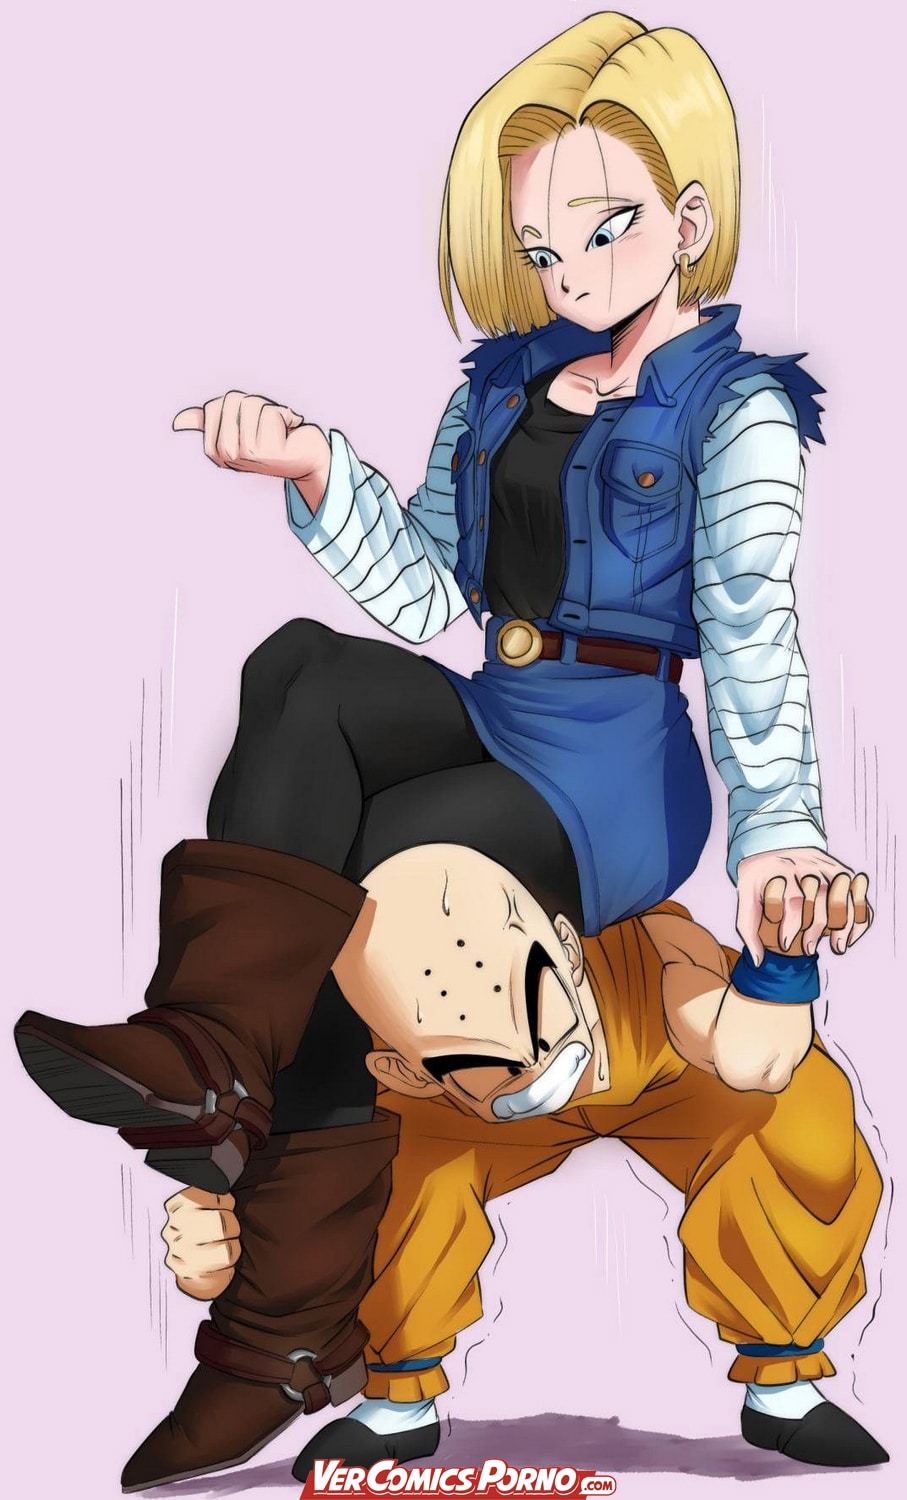 [Echo Saber] Android 18 Mini – Body Swapping With A Weakling (Traduccion Exclusiva) - 5